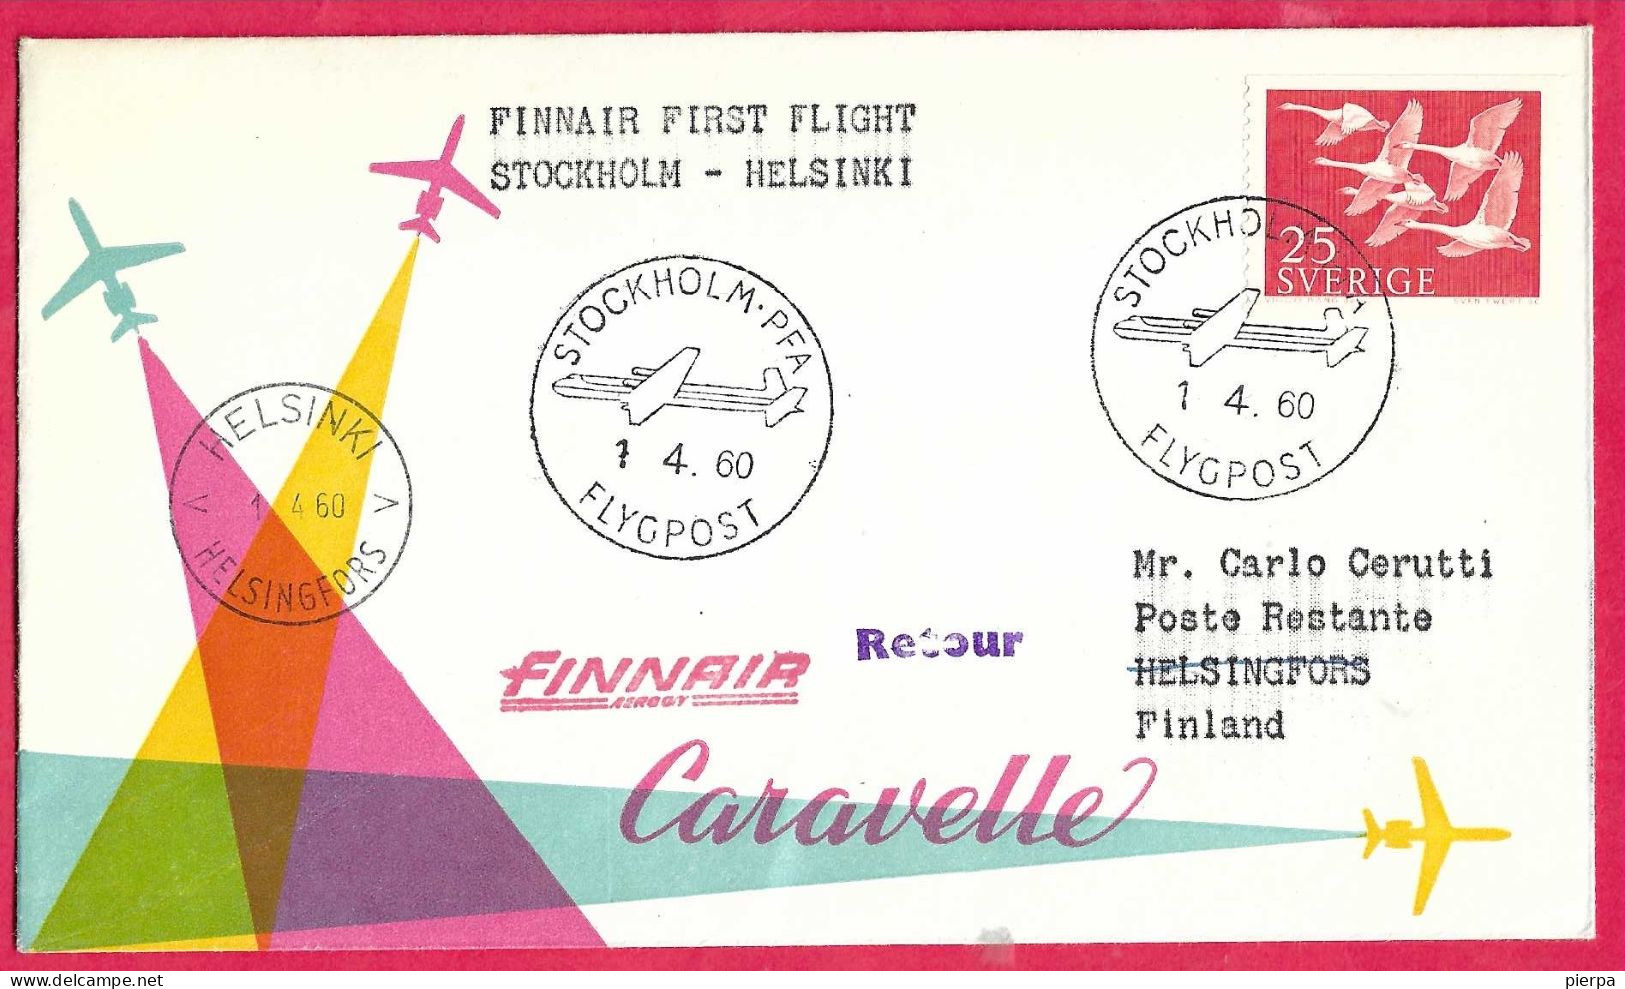 SVERIGE - FIRST FLIGHT FINNAIR WITH CARAVELLE FROM STOCKHOLM TO HELSINKI *1.4.60* ON OFFICIAL COVER - Briefe U. Dokumente